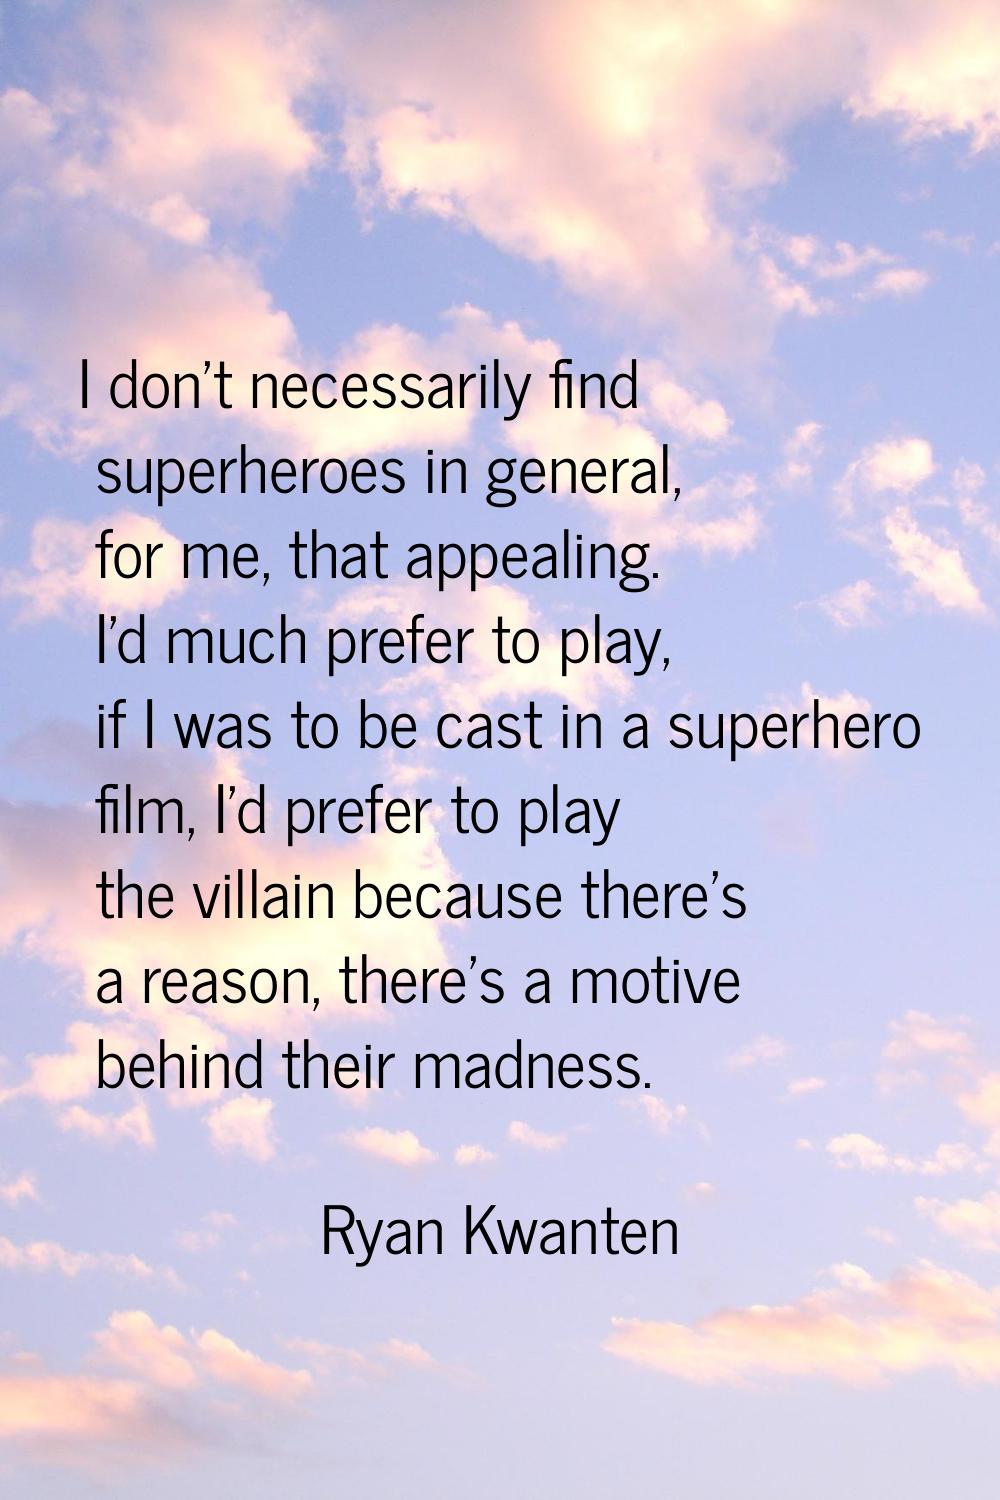 I don't necessarily find superheroes in general, for me, that appealing. I'd much prefer to play, i